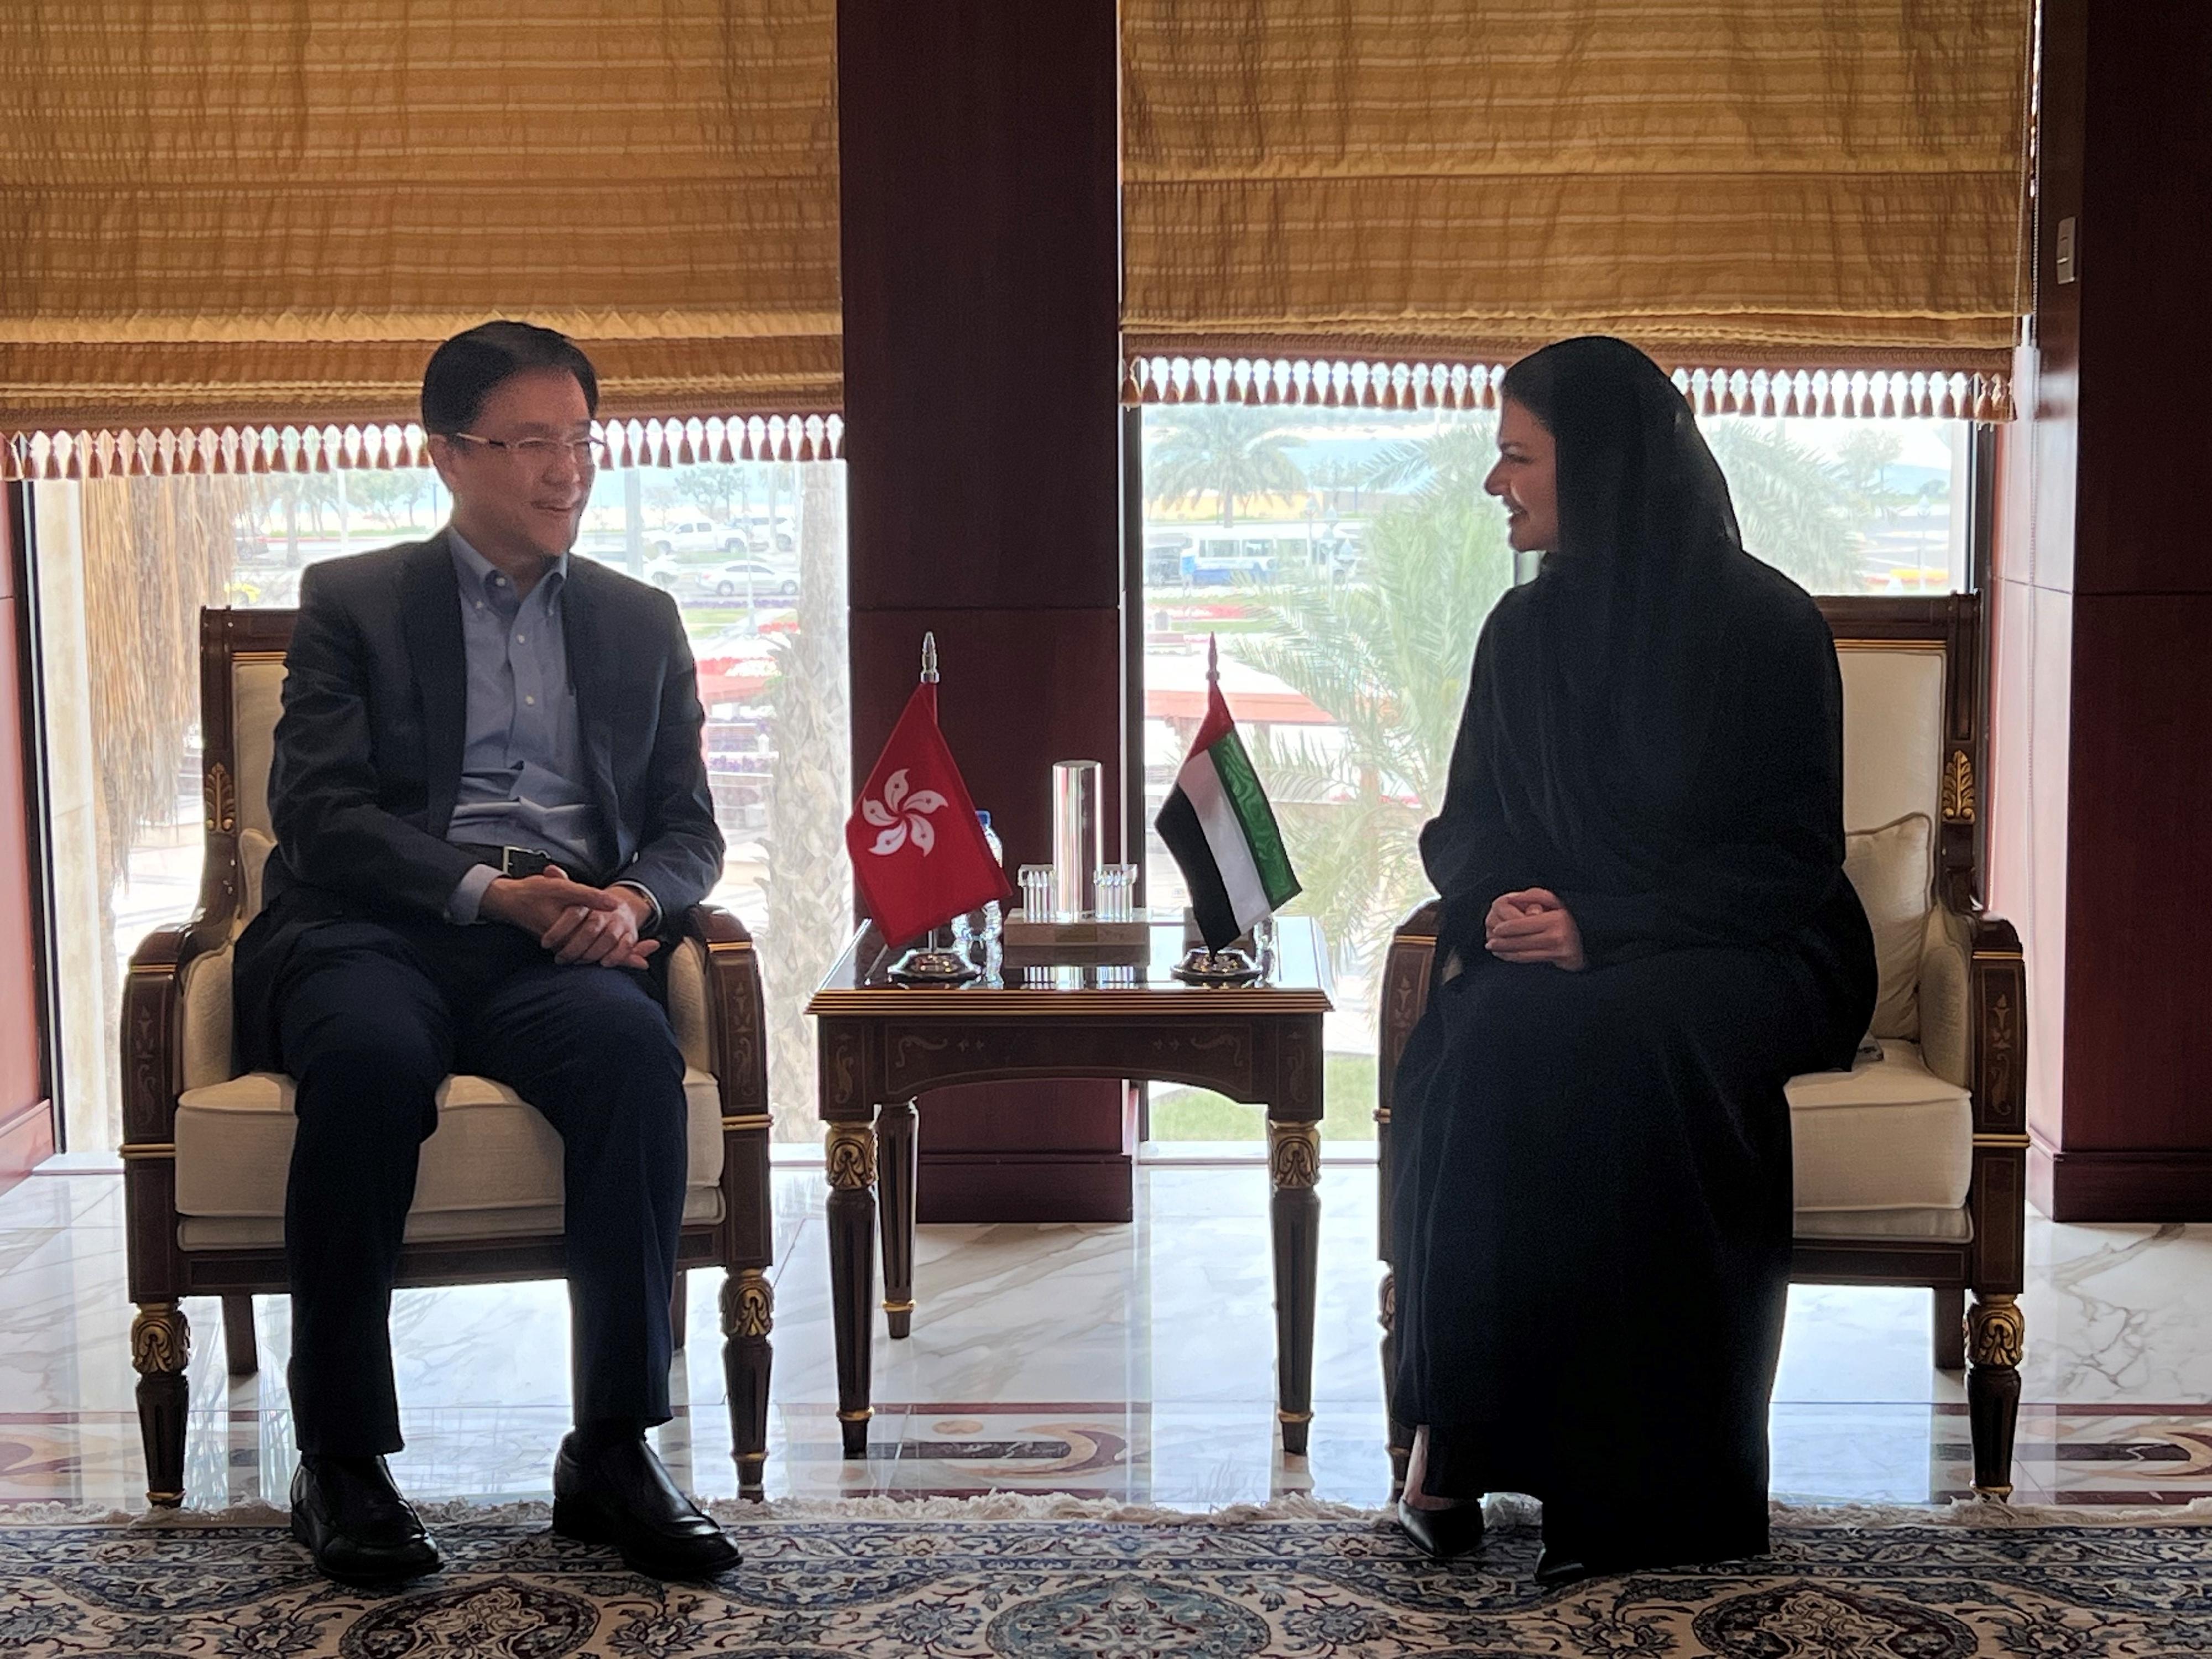 The Secretary for Innovation, Technology and Industry, Professor Sun Dong (left), met with the Board Member of the Abu Dhabi Chamber of Commerce and Industry, Ms Noor Al Tamimi (right), on March 7 (Abu Dhabi time) and exchanged views on forging closer business and trade ties between Hong Kong and Abu Dhabi, as well as strengthening co-operation in such areas as innovation and technology and new industrialisation.